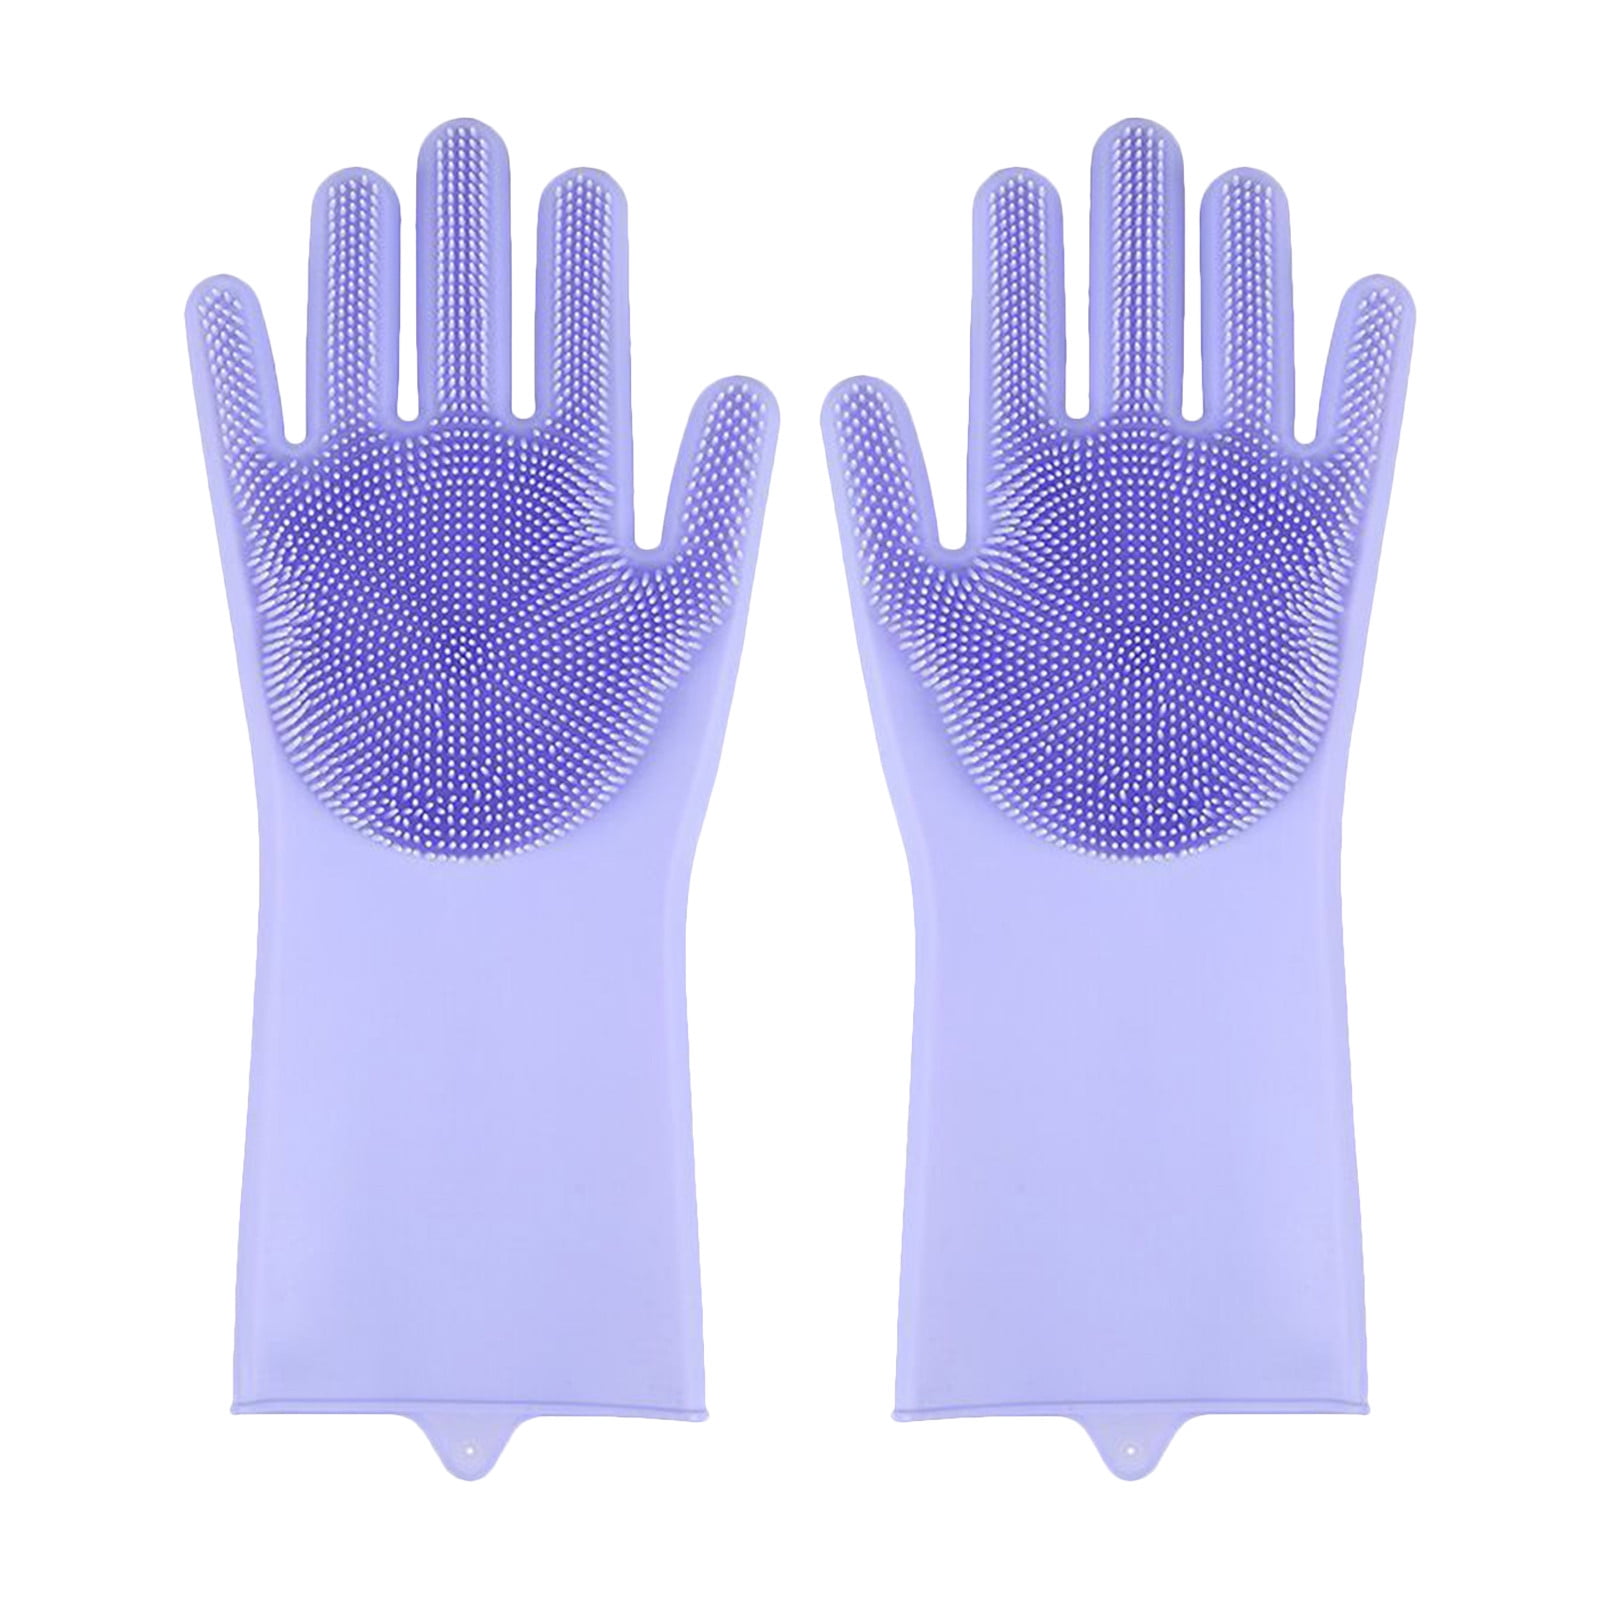 ANZOEE Silicone Dishwashing Gloves,Reusable Rubber Dishwashing Gloves for Household, Bathroom,Pet Bathing, Cars, Fruit and More (Blue)